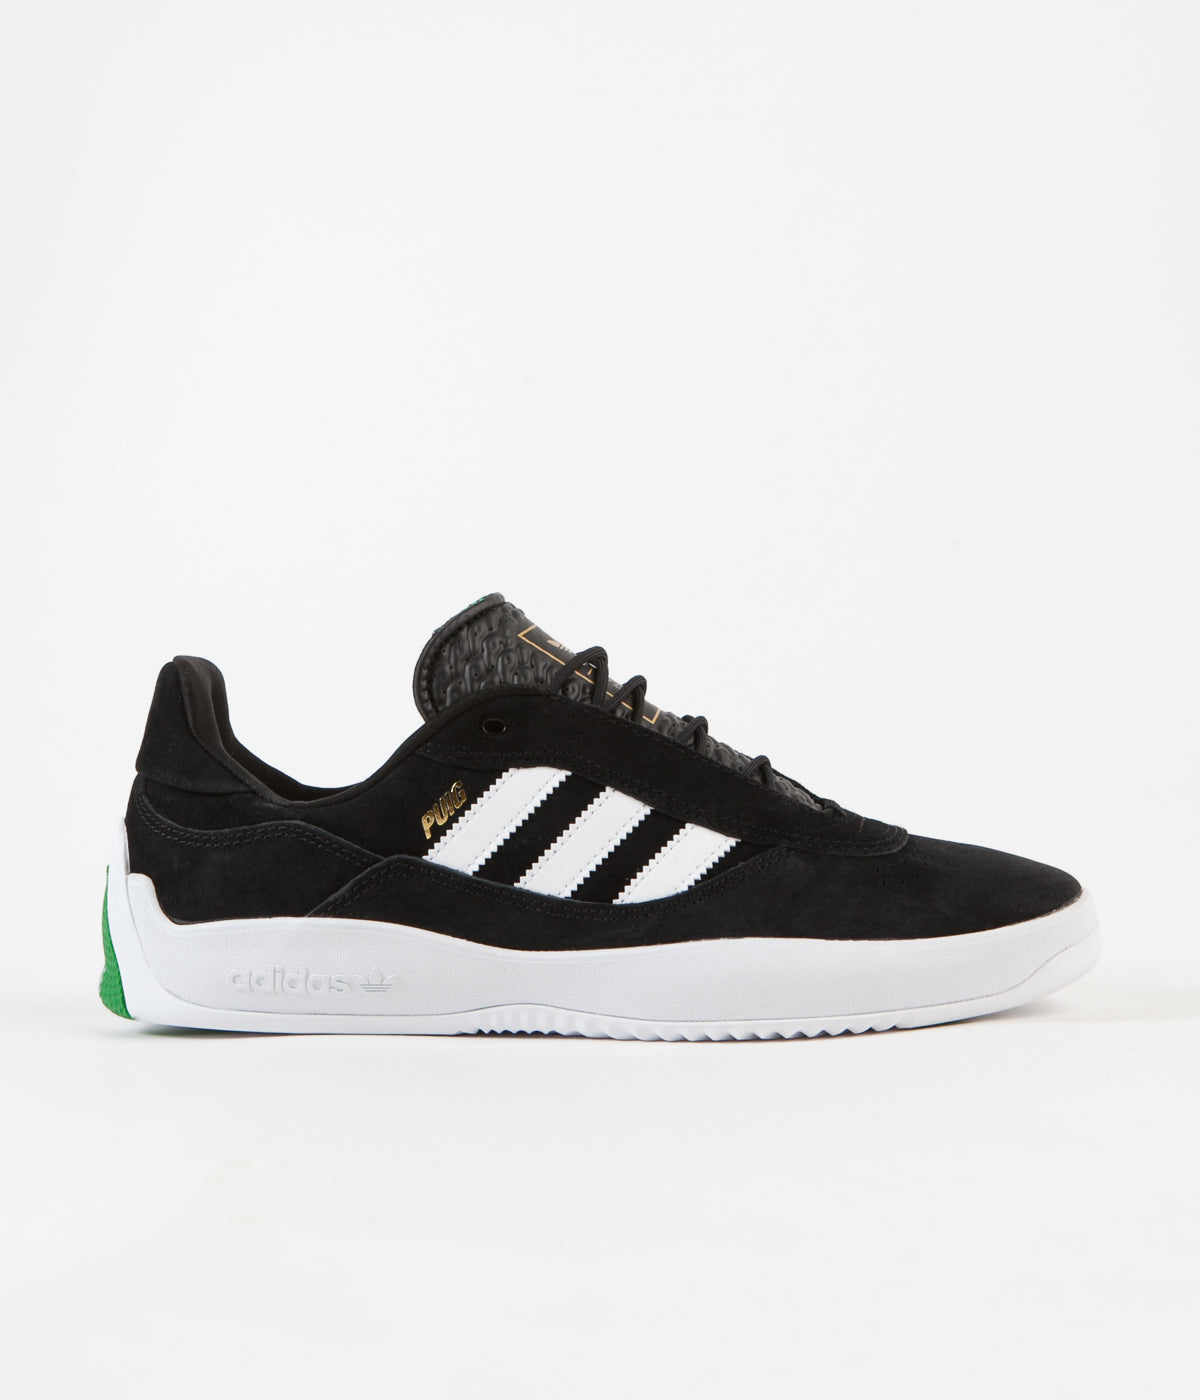 adidas black with white stripes shoes